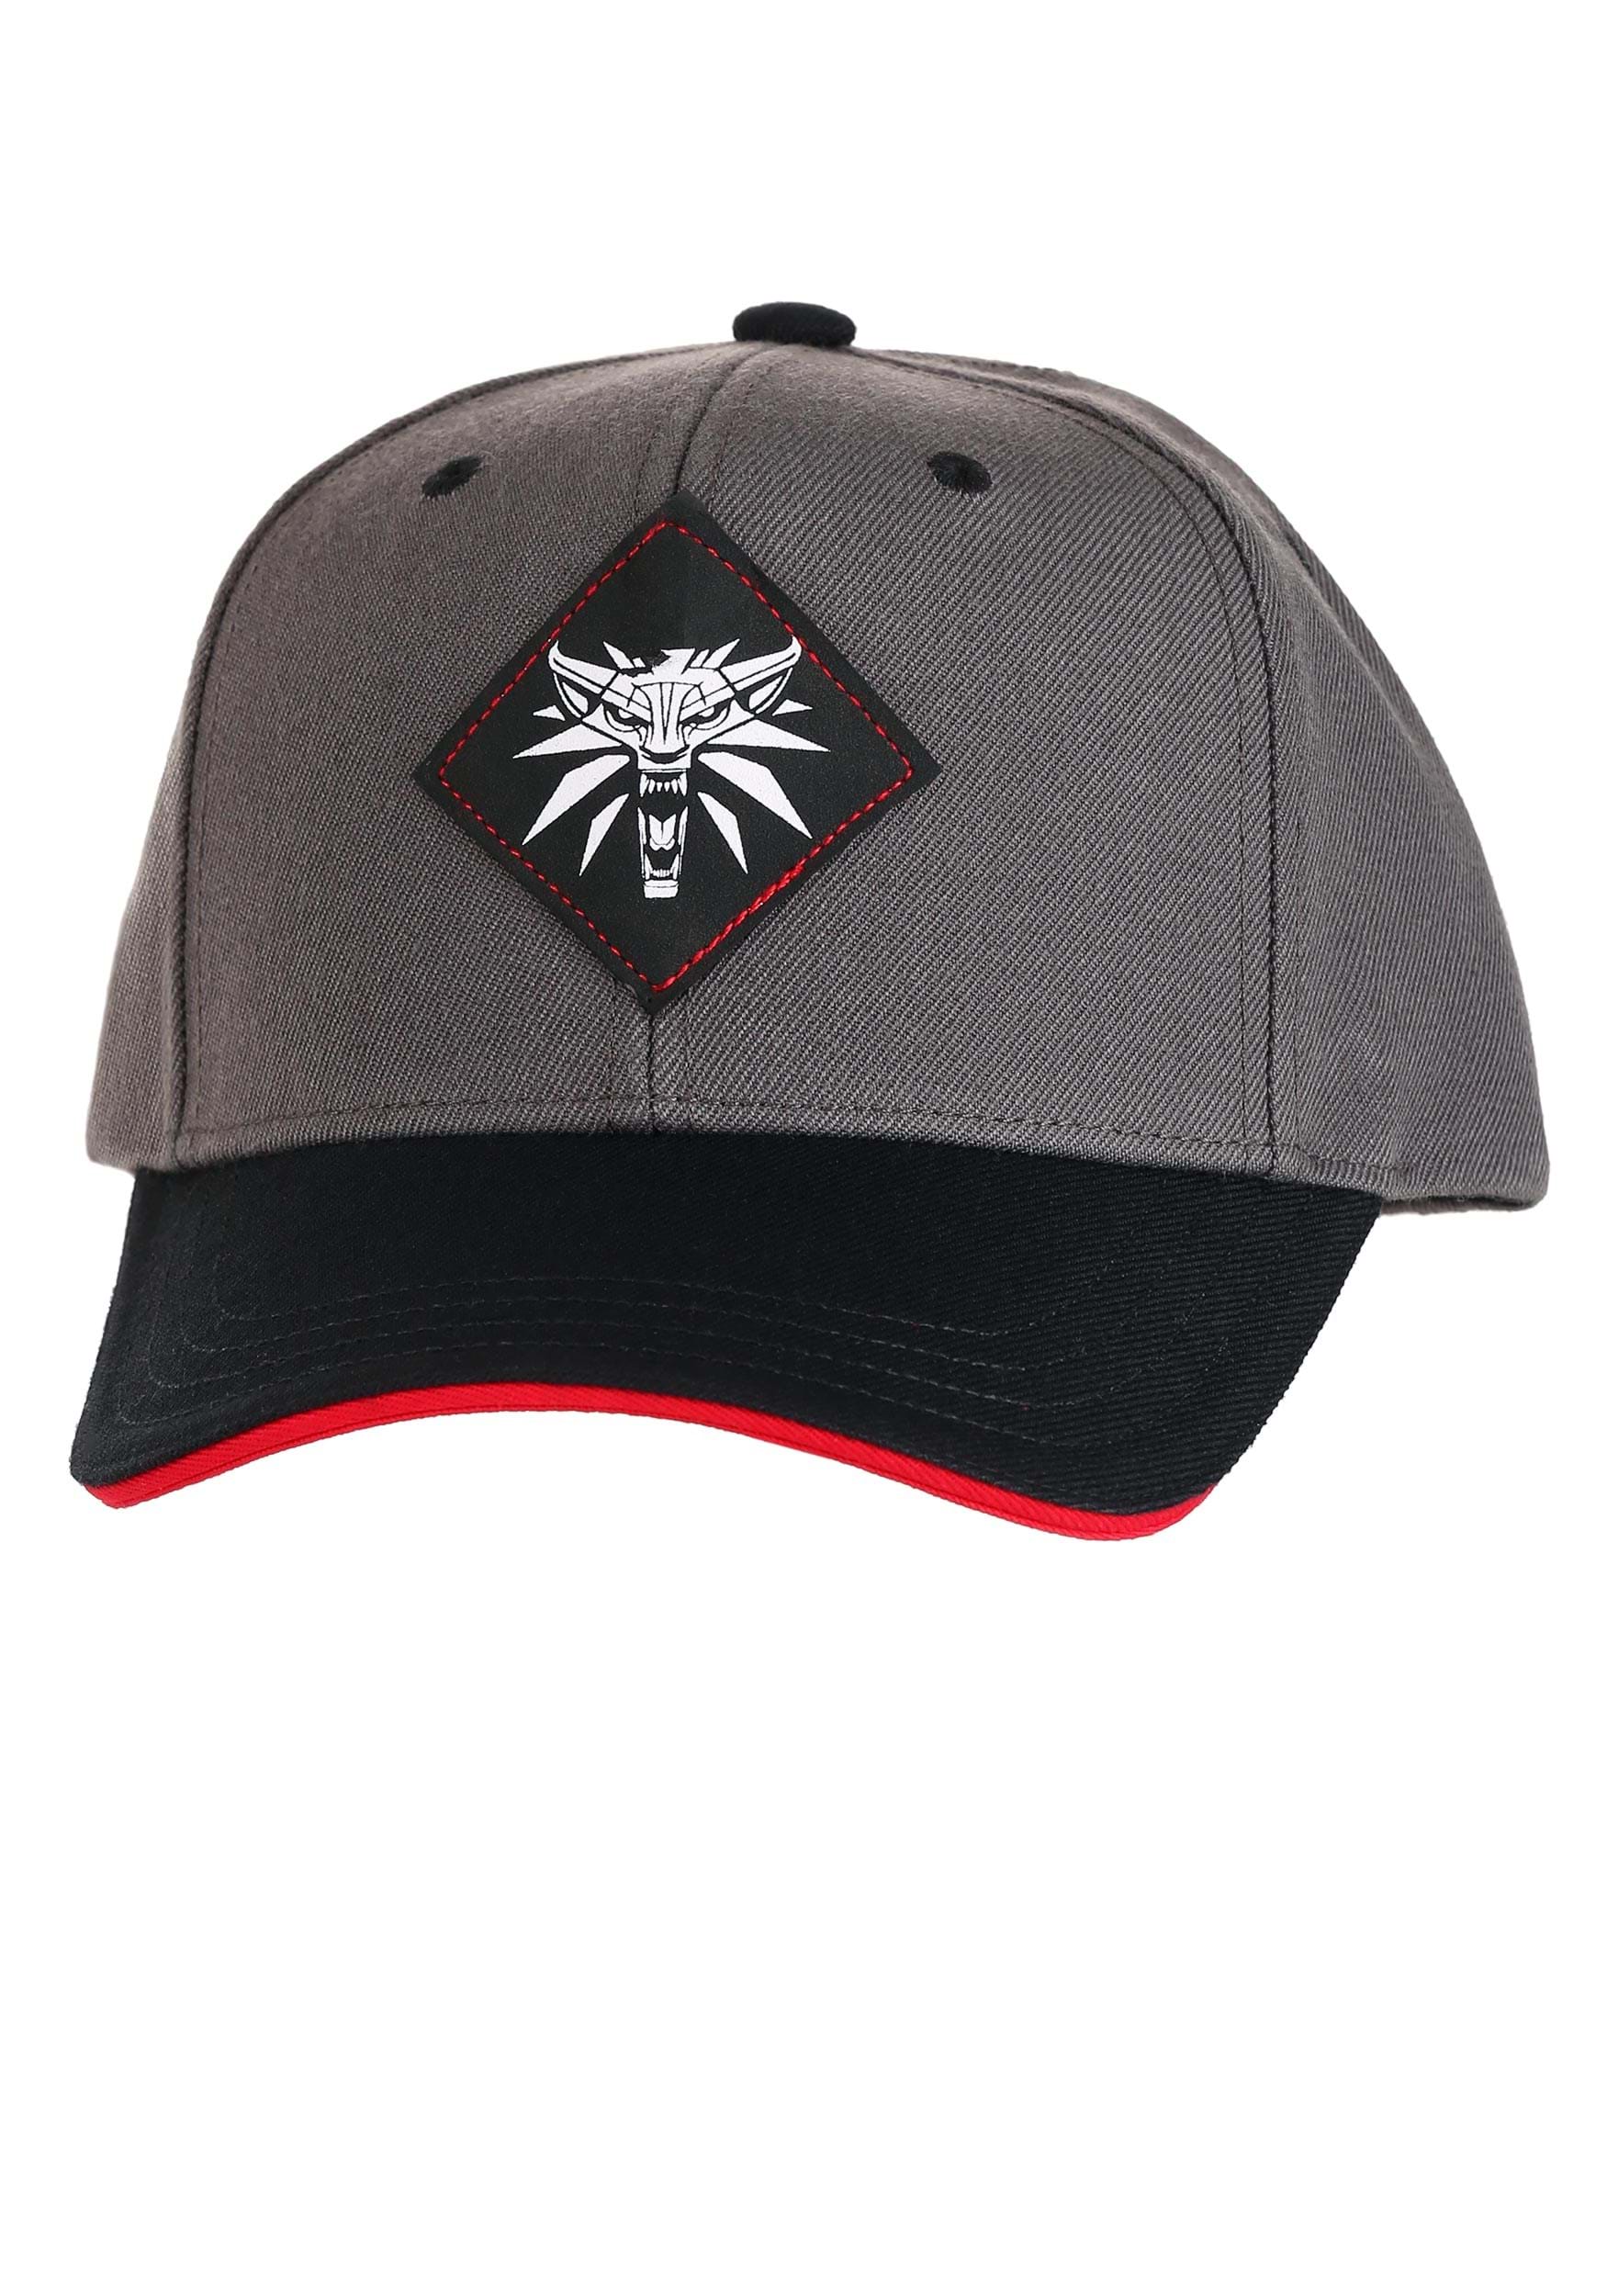 The Witcher 3 Witcher Slays Snap Back Grey/Red Hat 